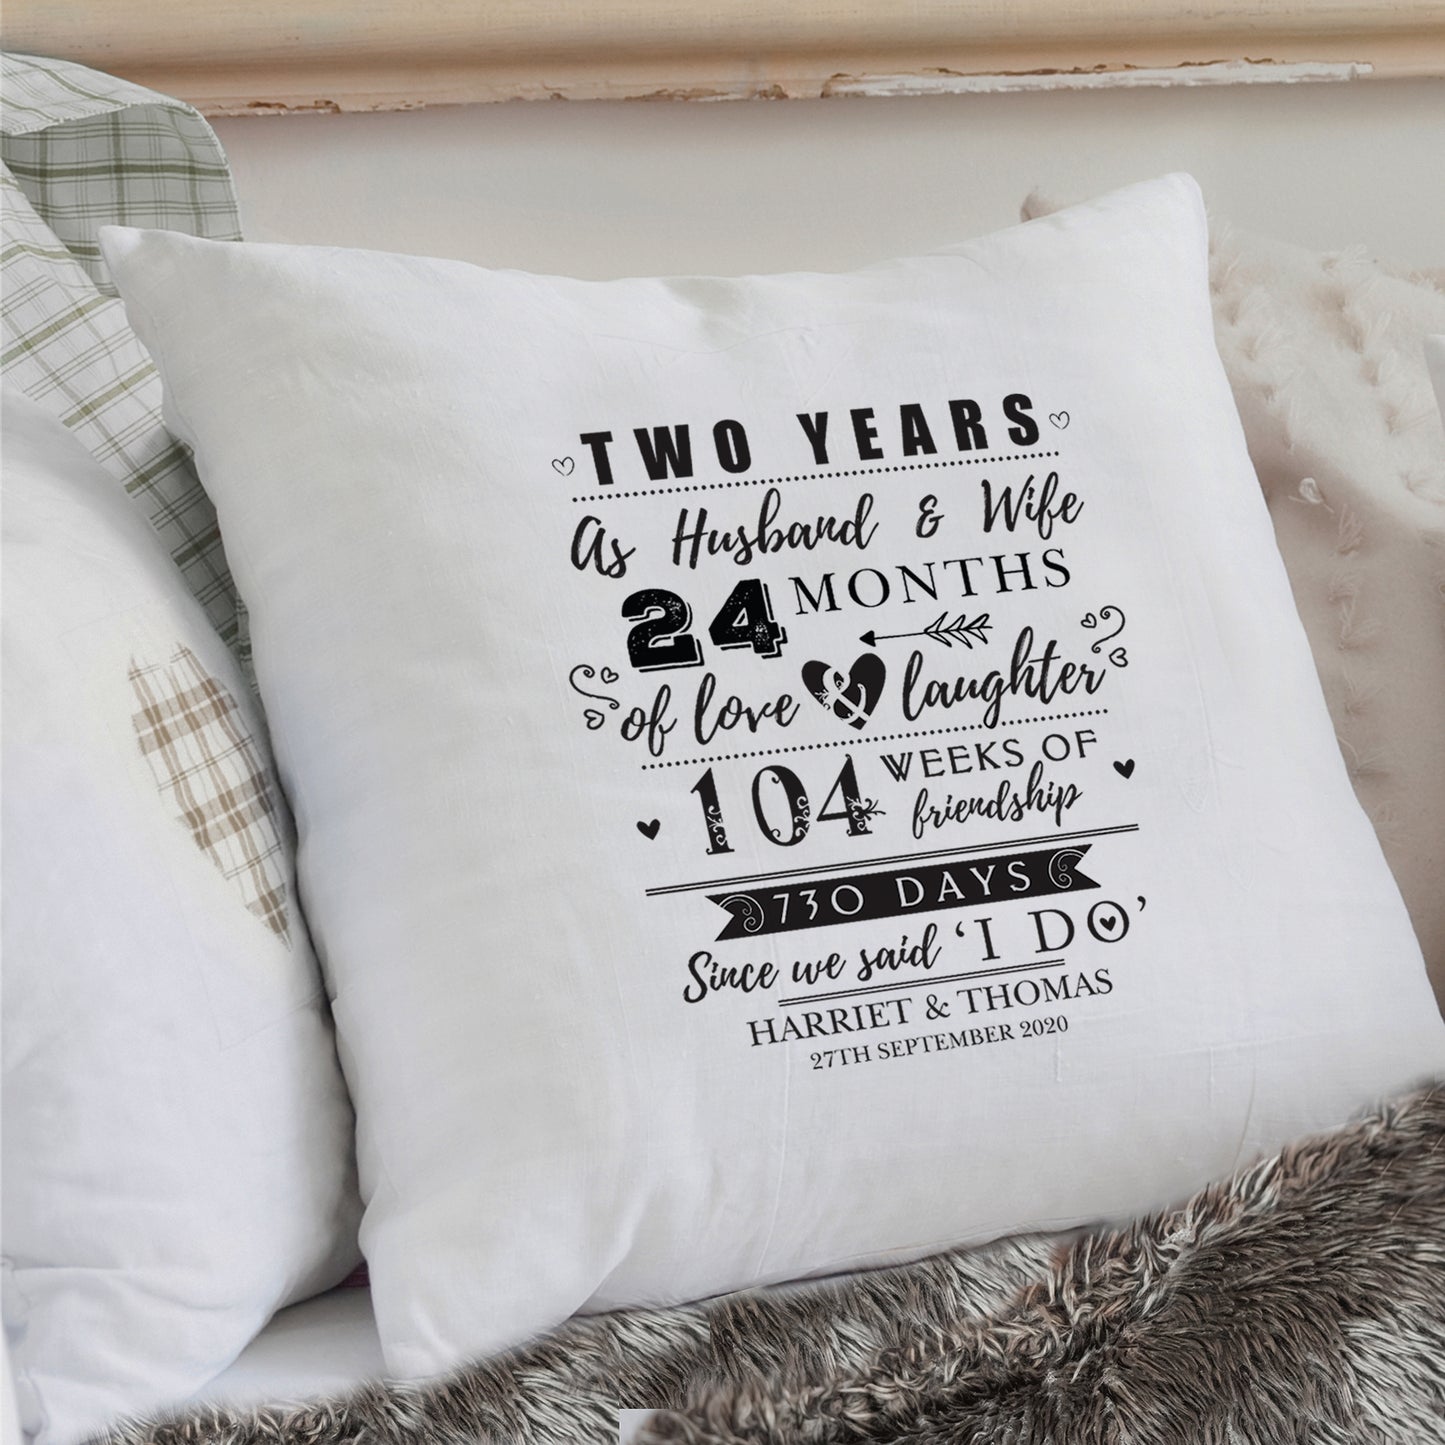 Personalised 2nd Anniversary Cushion Cover - Personalise It!